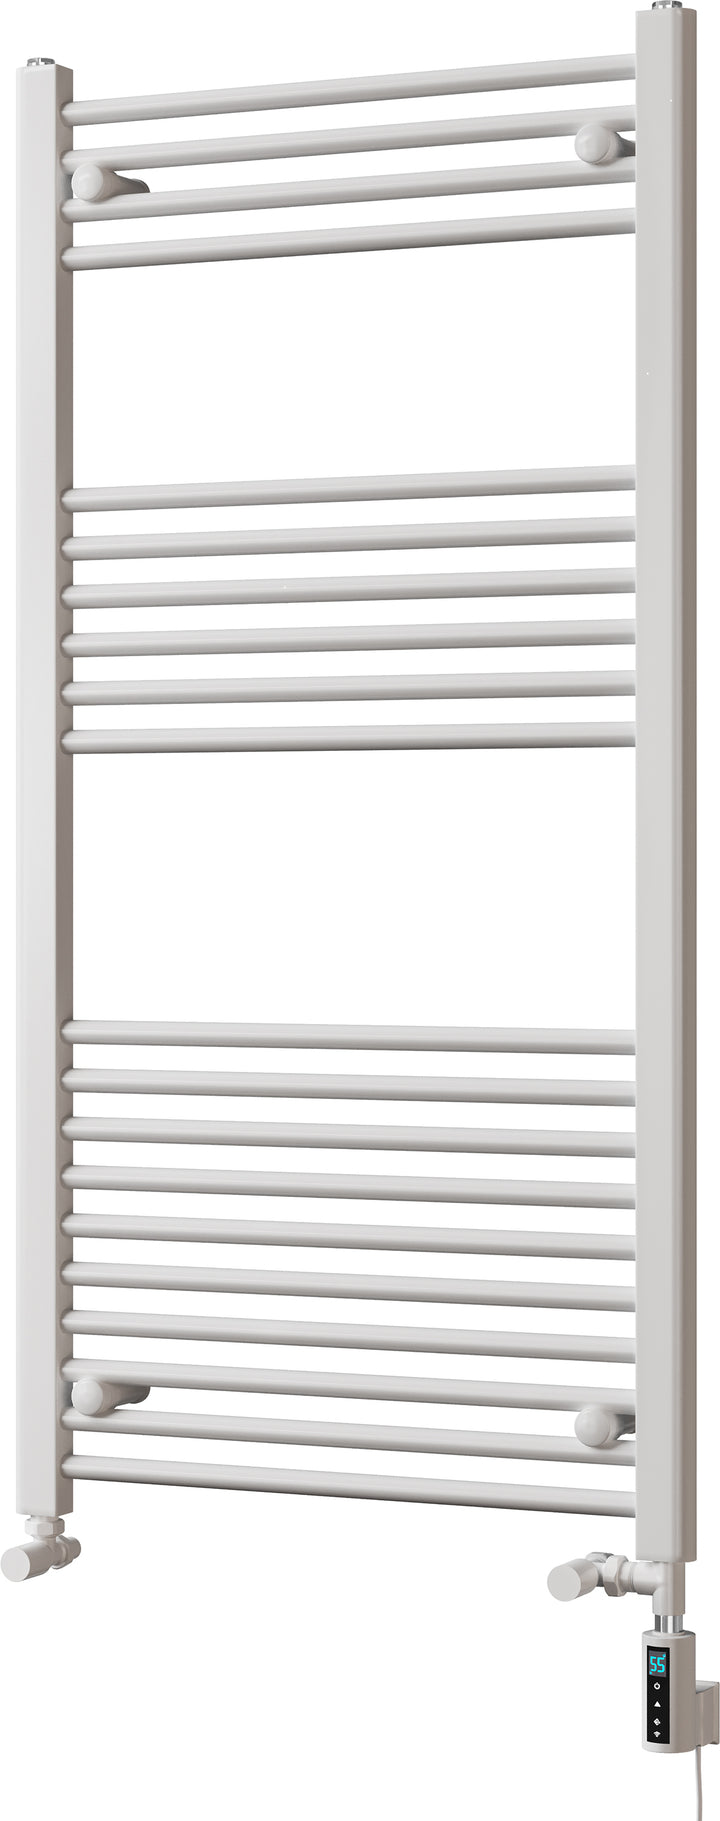 Zennor - White Dual Fuel Towel Rail H1200mm x W600mm Thermostatic WIFI - Straight